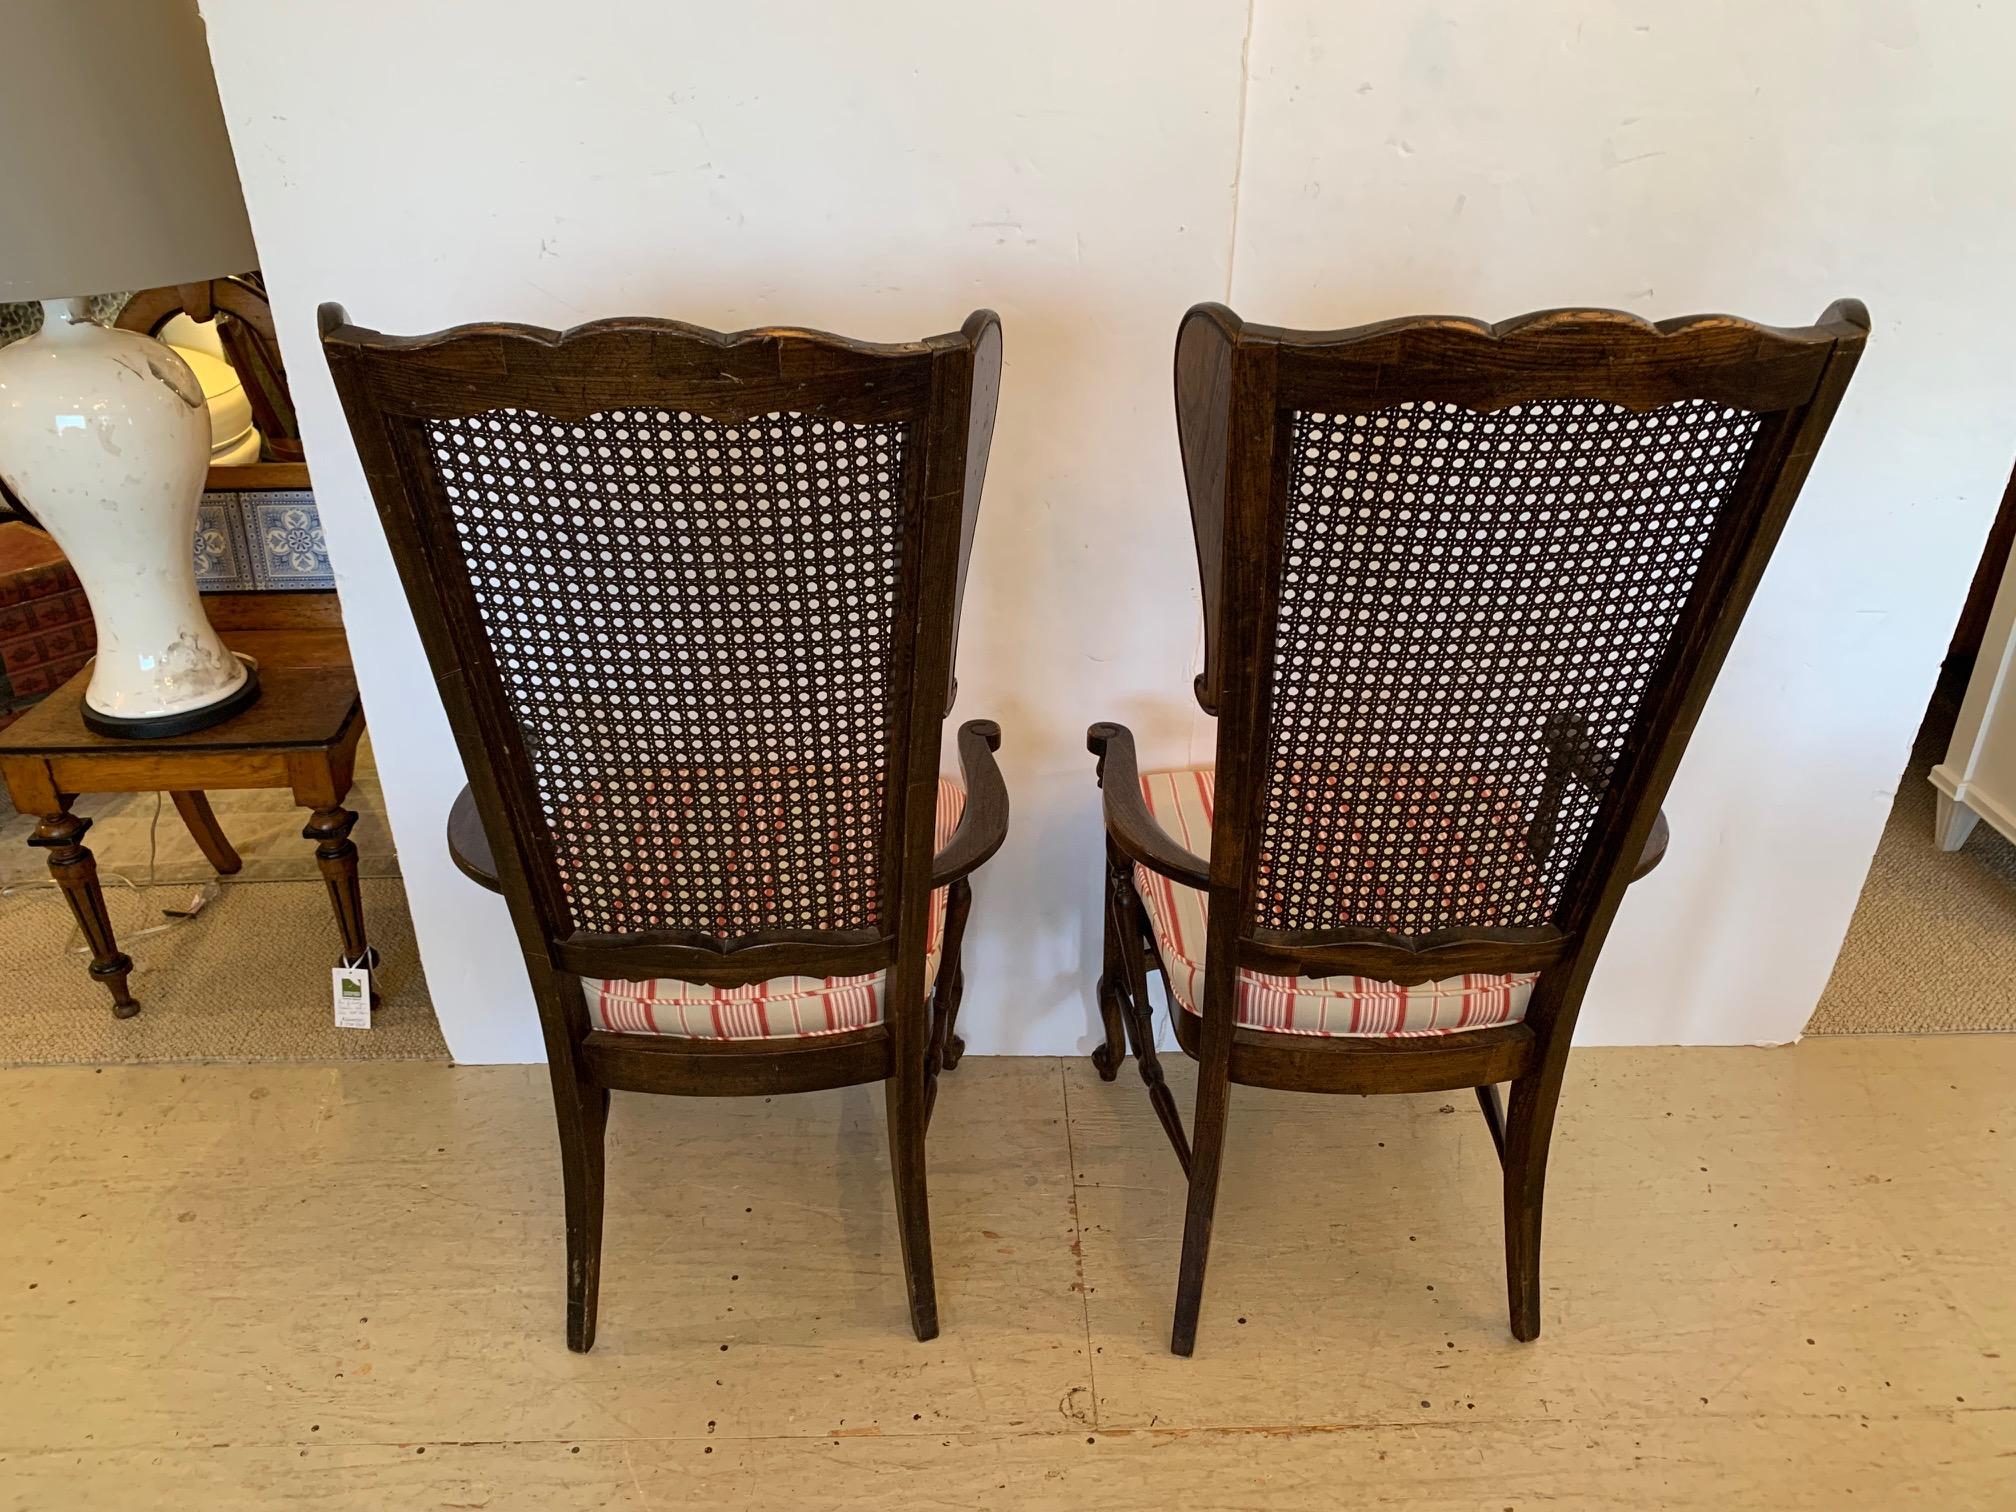 Stylish versatile pair of walnut armchairs having elongated caned back with scalloped top and side wings that flair out. Seat is upholstered in a light green and burnt orange striped fabric. Handsome curvy stretchers and snail shaped feet. These